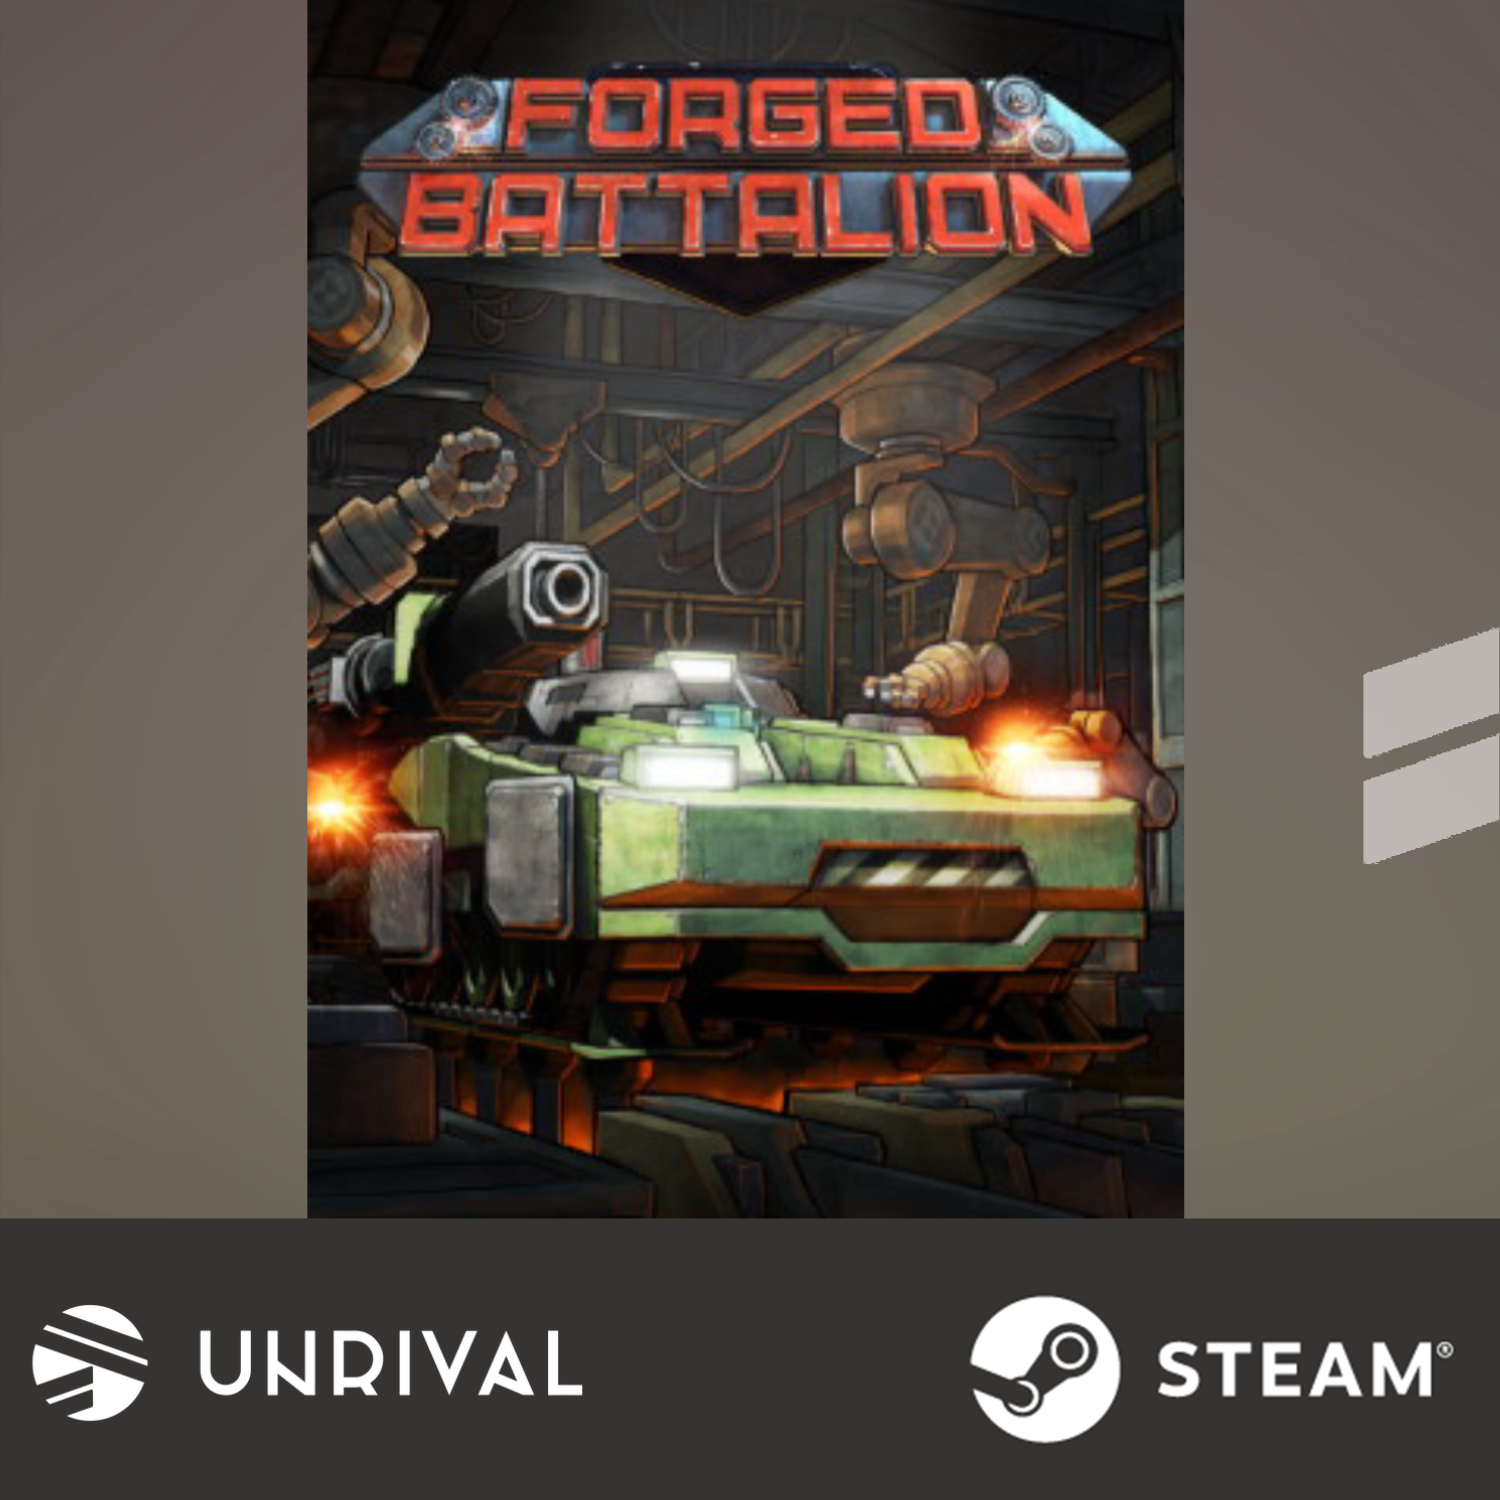 [Hot Sale] Forged Battalion PC Digital Download Game (Multiplayer) - Unrival